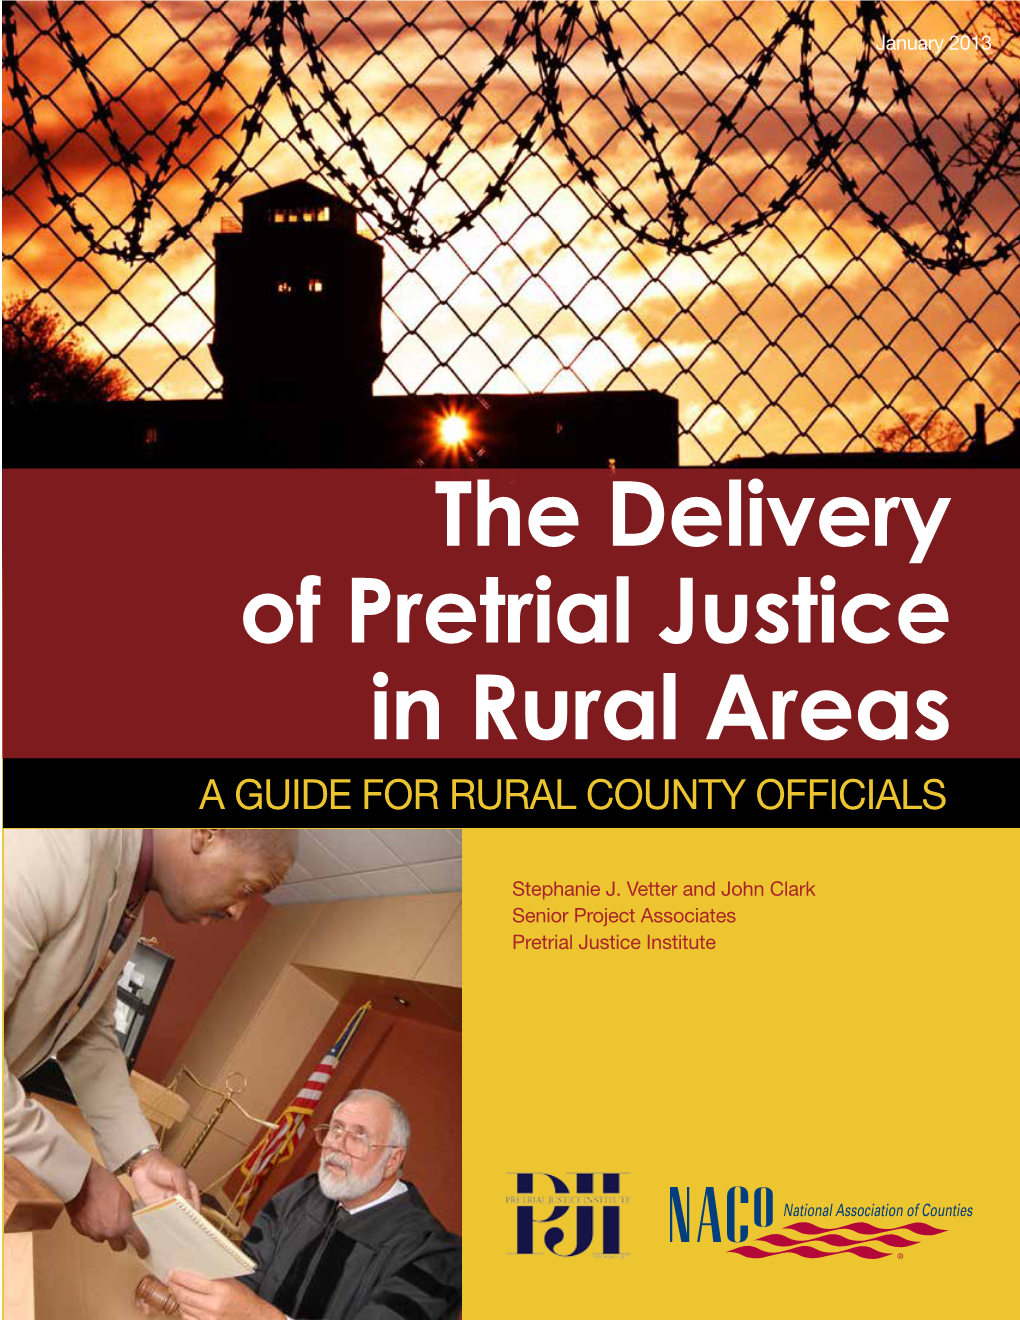 The Delivery of Pretrial Justice in Rural Areas: a Guide for Rural County Officials